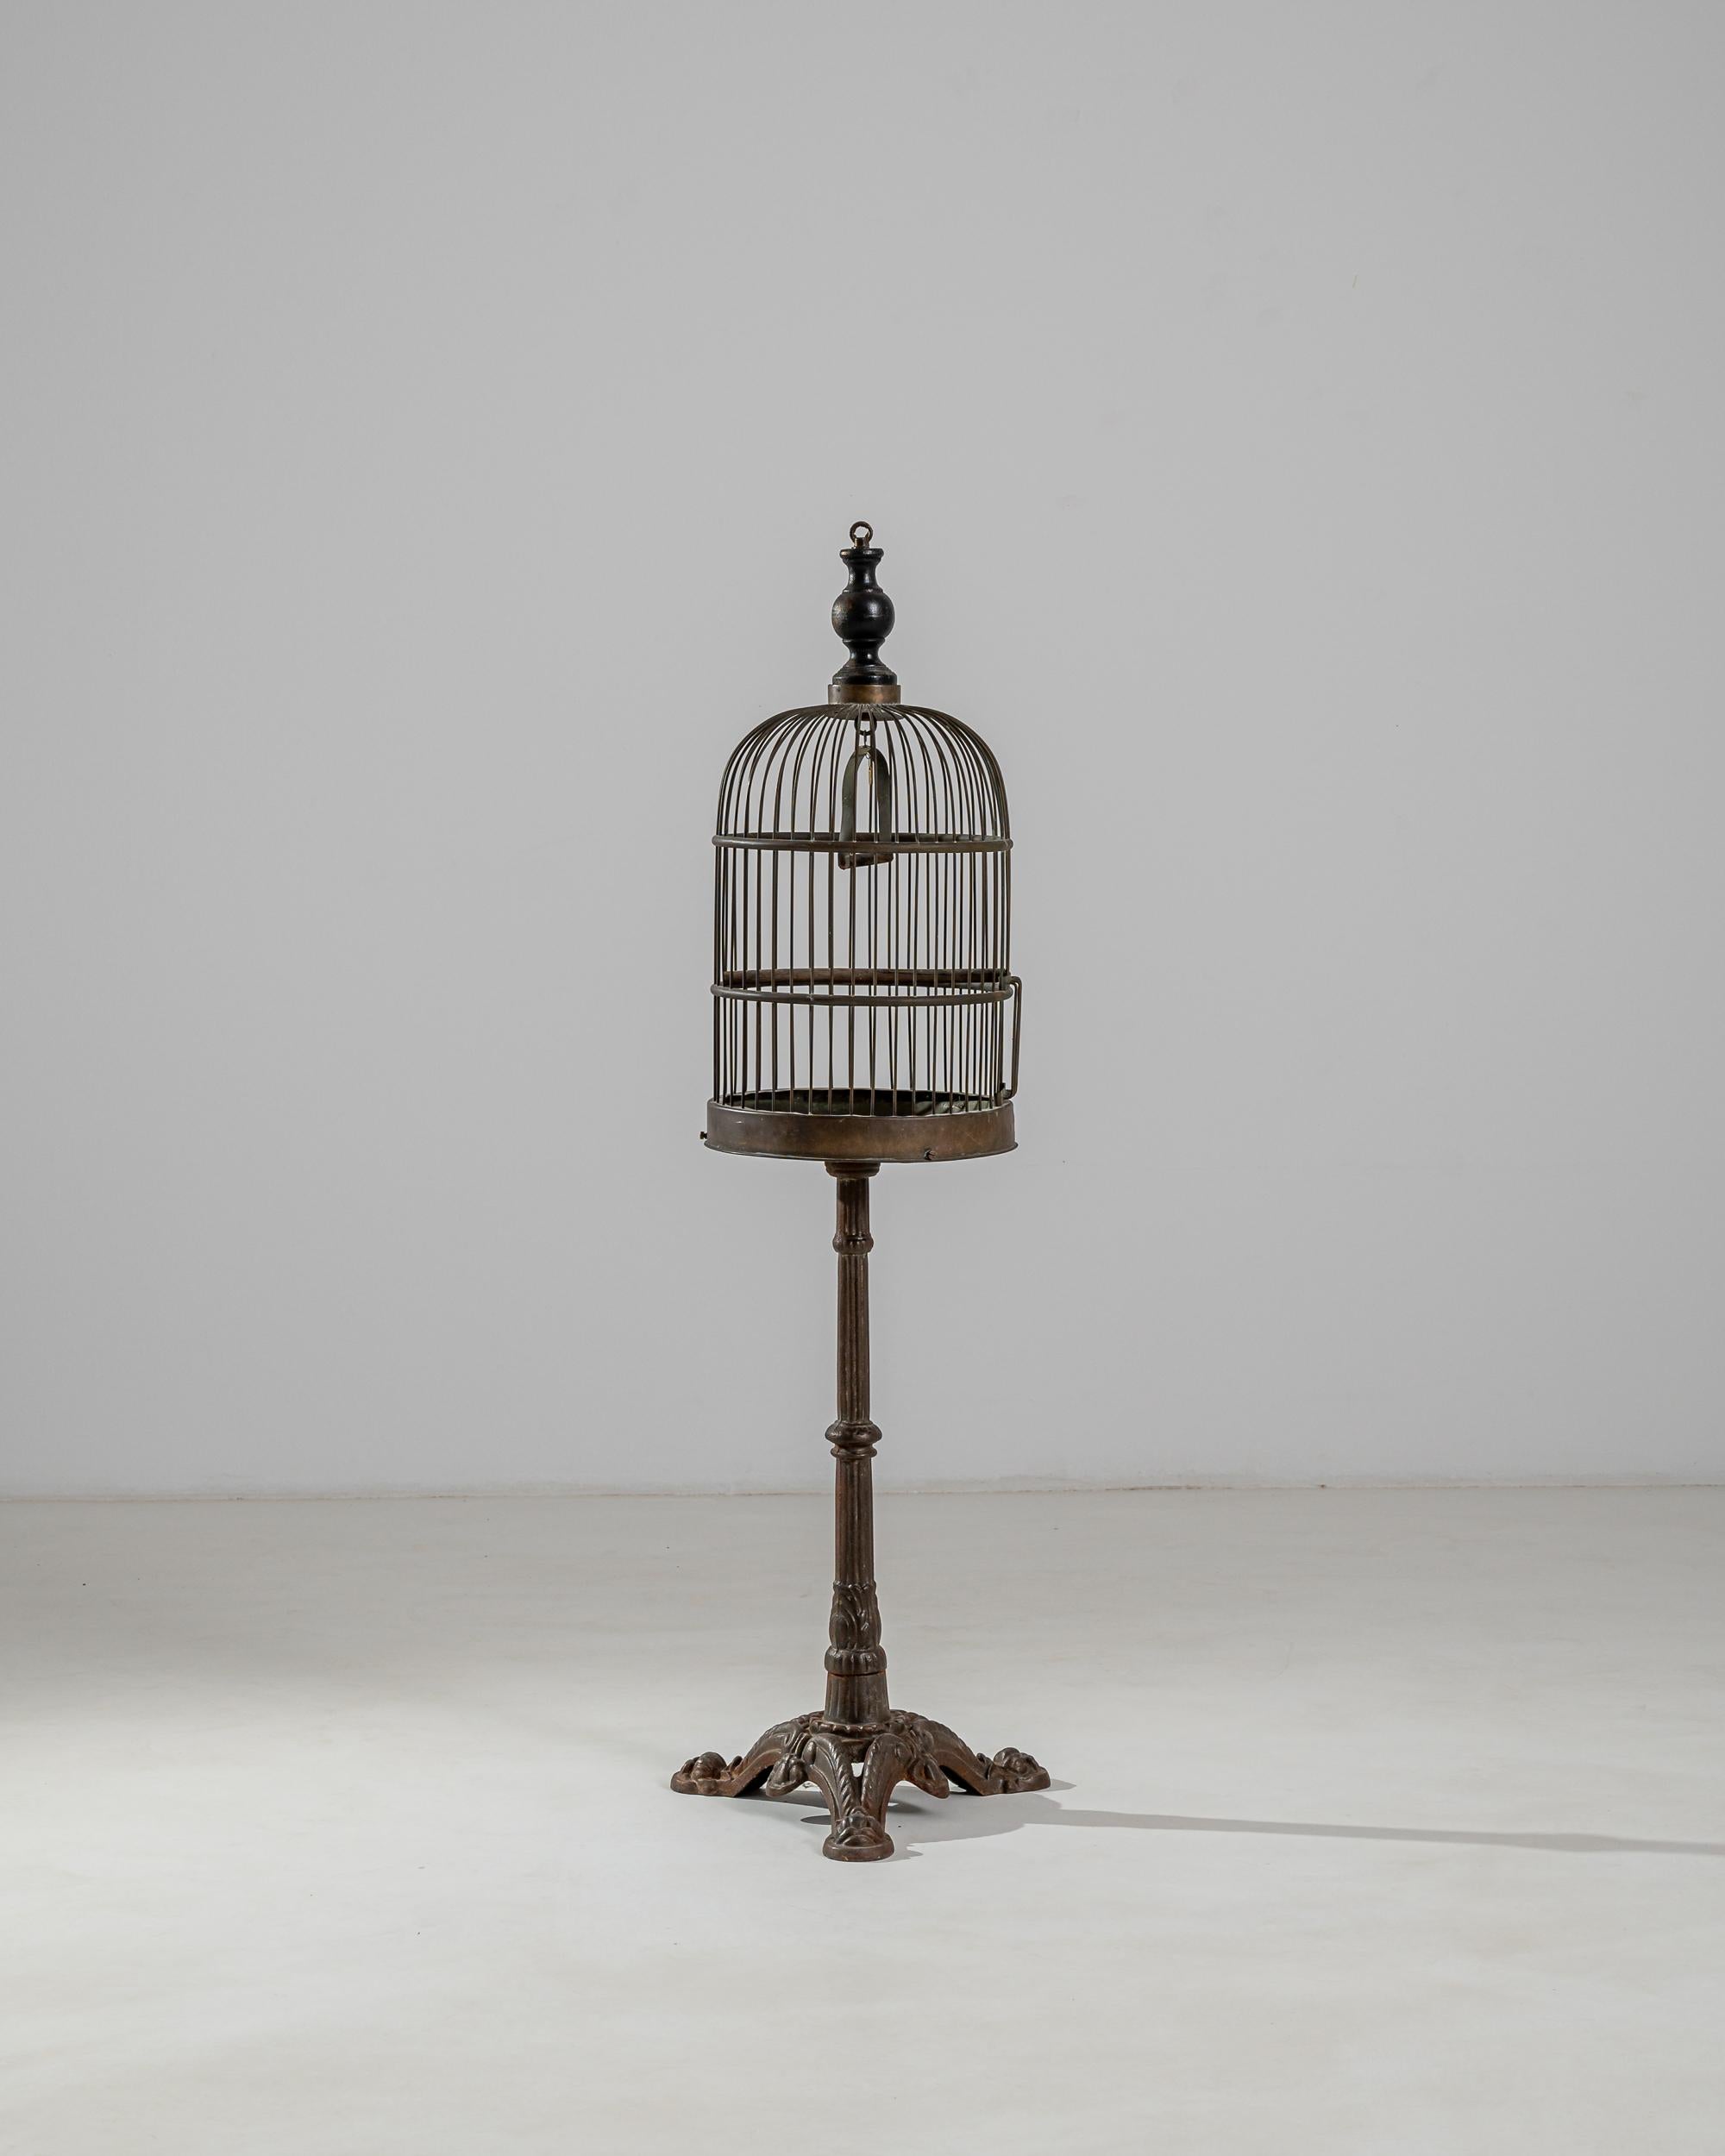 A metal birdcage produced in France circa 1900. Elevated on a sculptural stand with richly molded tripod legs, this vintage birdcage has an oval dome topped with a pointed finial that elegantly punctuates the rounded silhouette of the cupola.